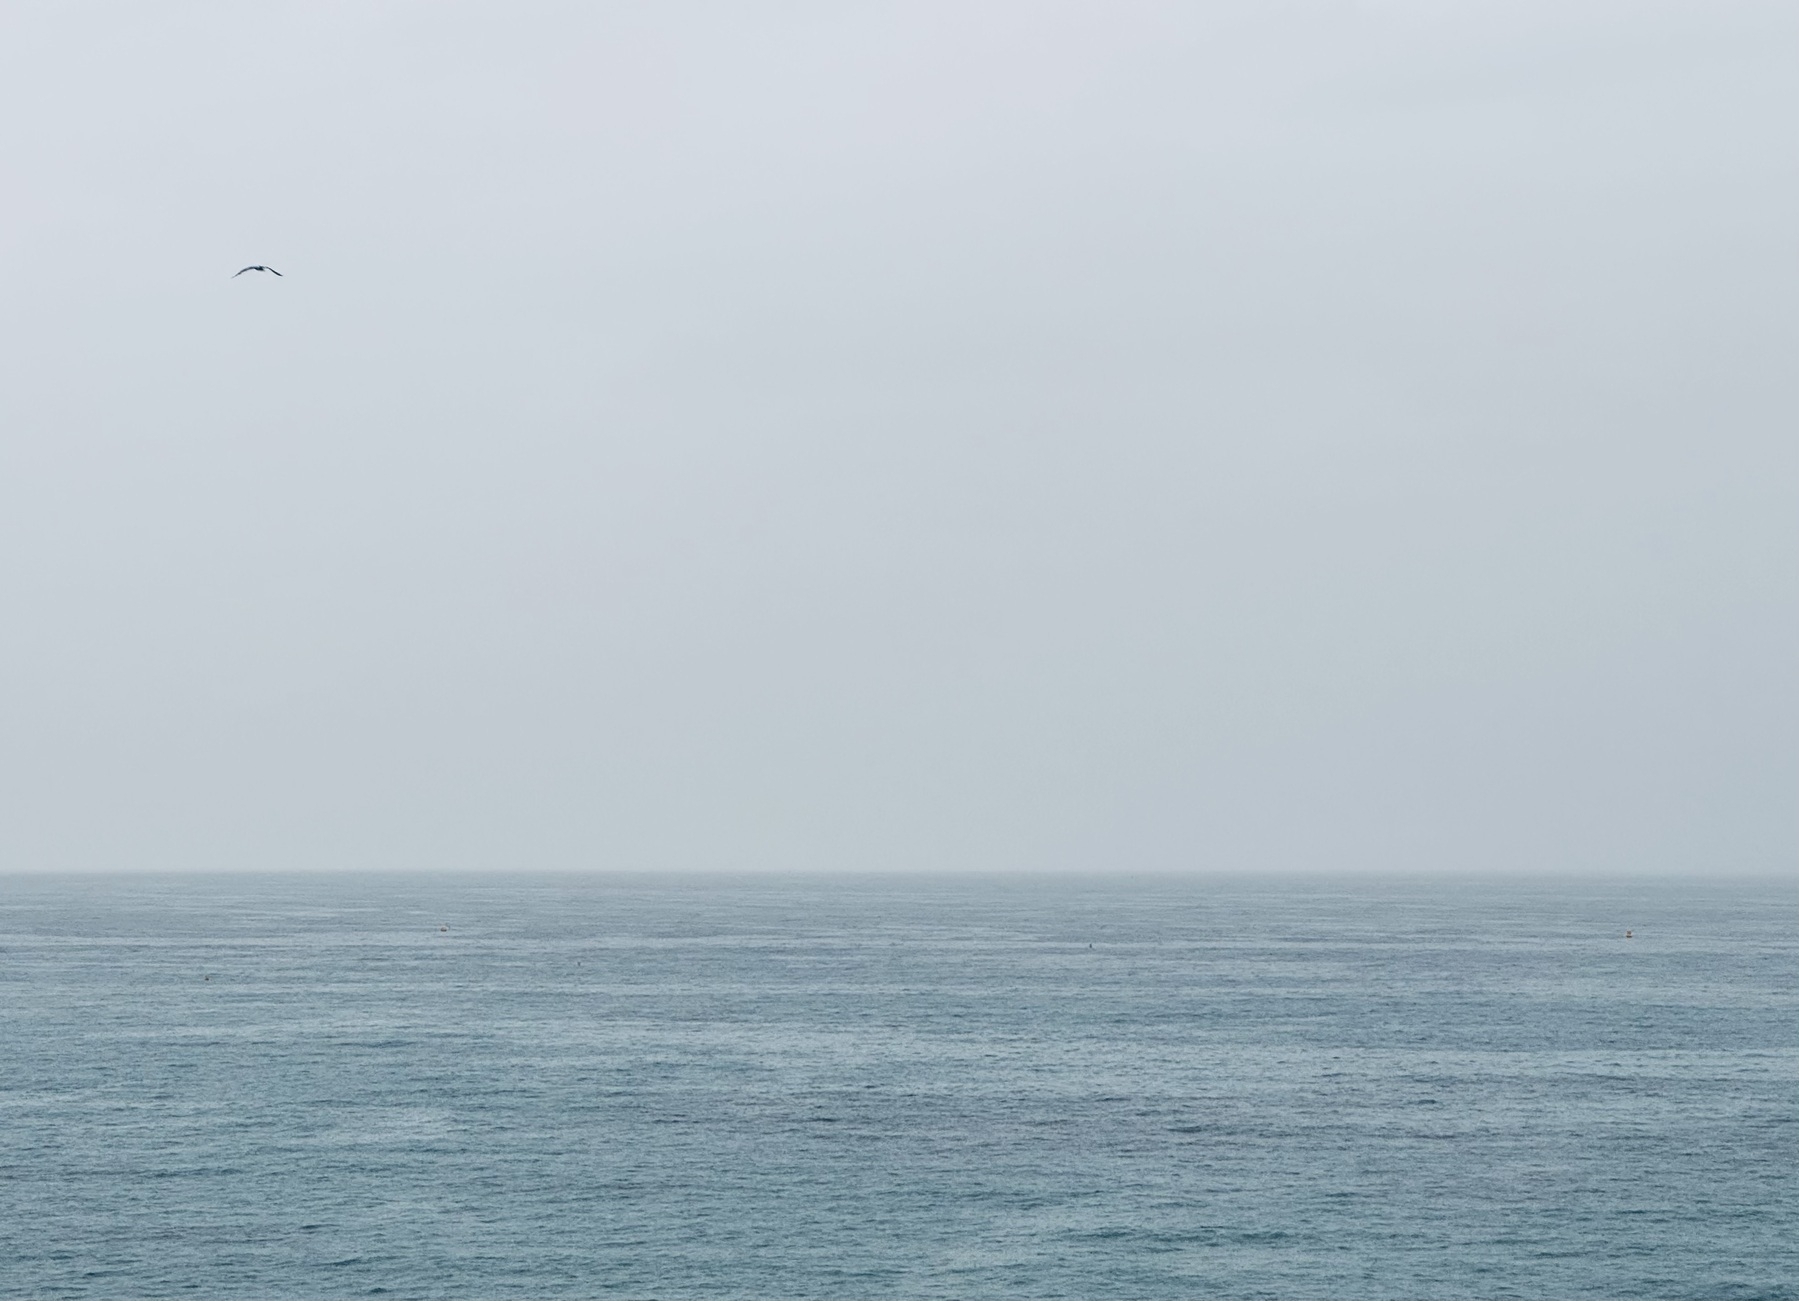 The Mediterranean Sea beneath a cloudy sky, with a lone seagull flying.